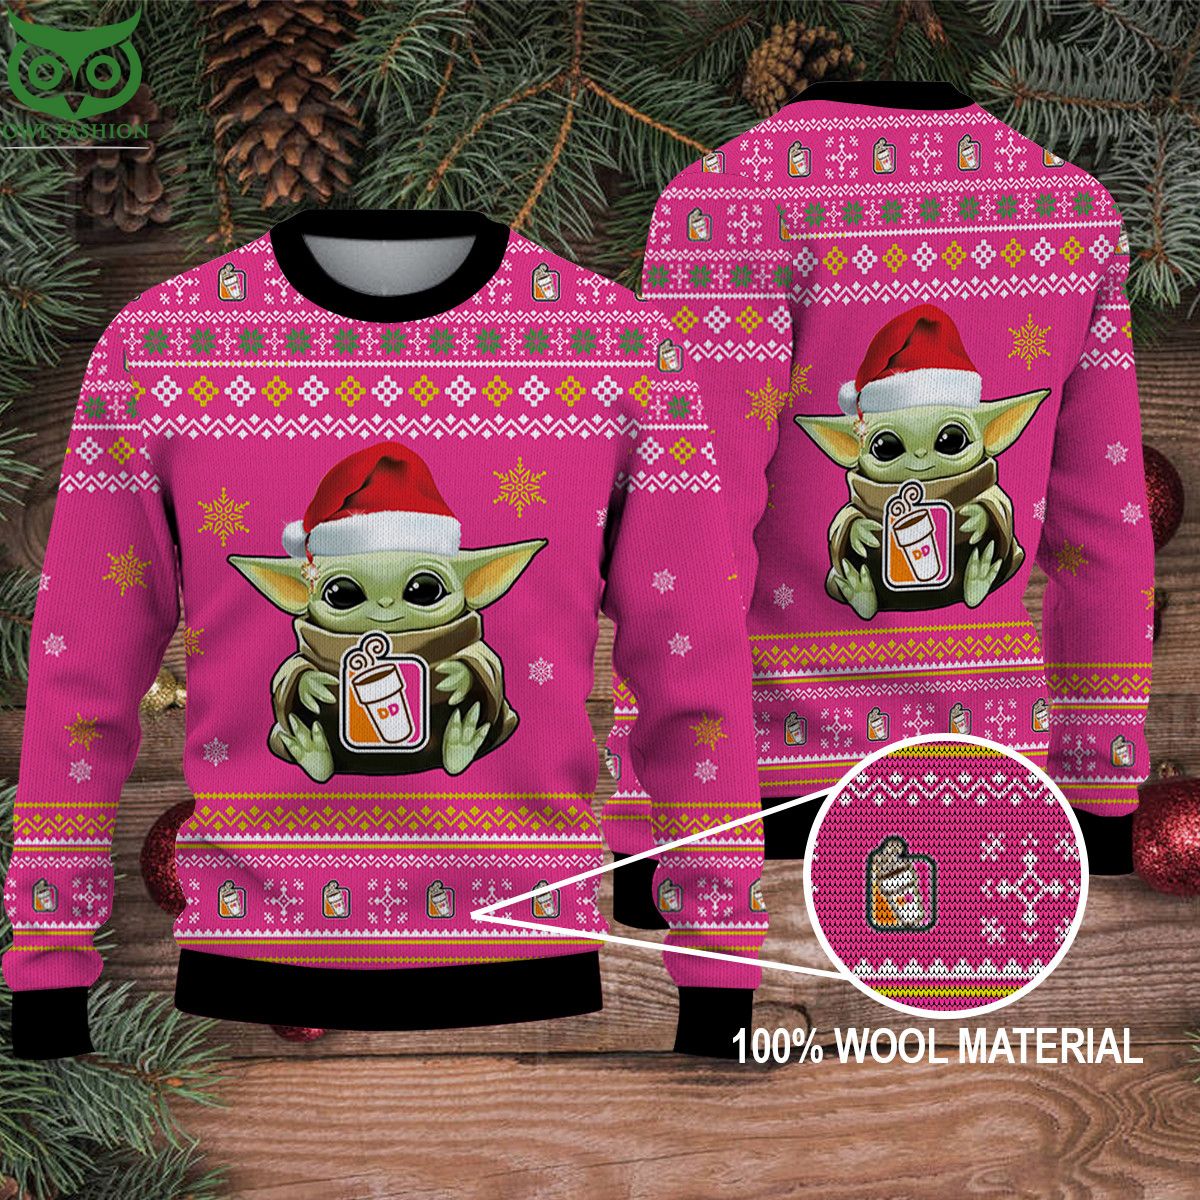 Dunkin� Donuts Hot Ugly Sweater Is this your new friend?